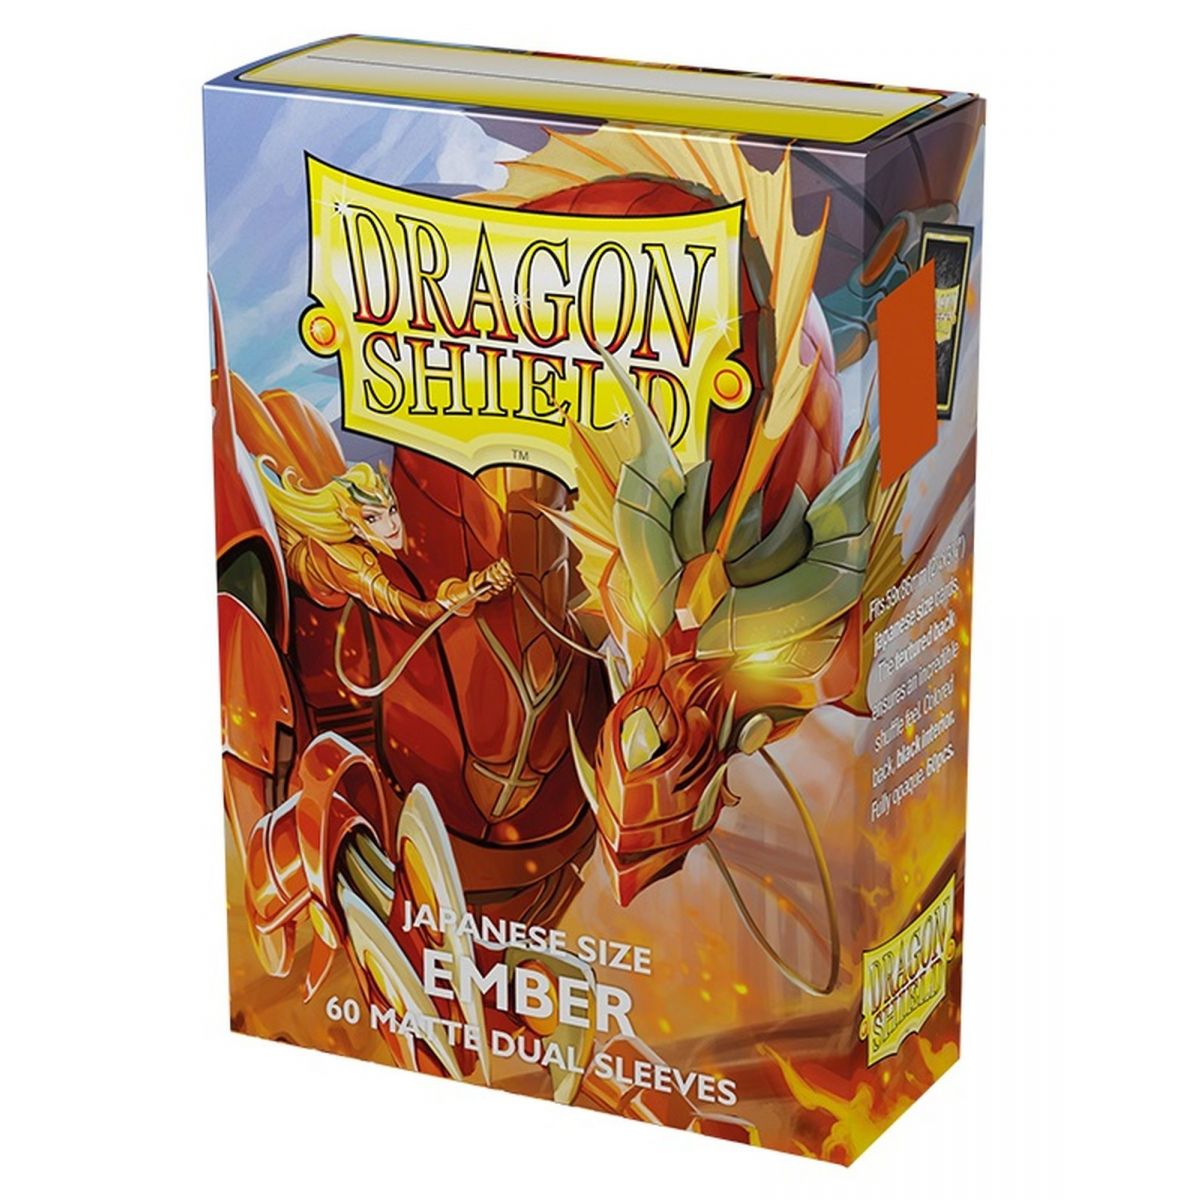 Item Dragon Shield - Small Sleeves - Japanese Size - Dual Matte Ember (60)